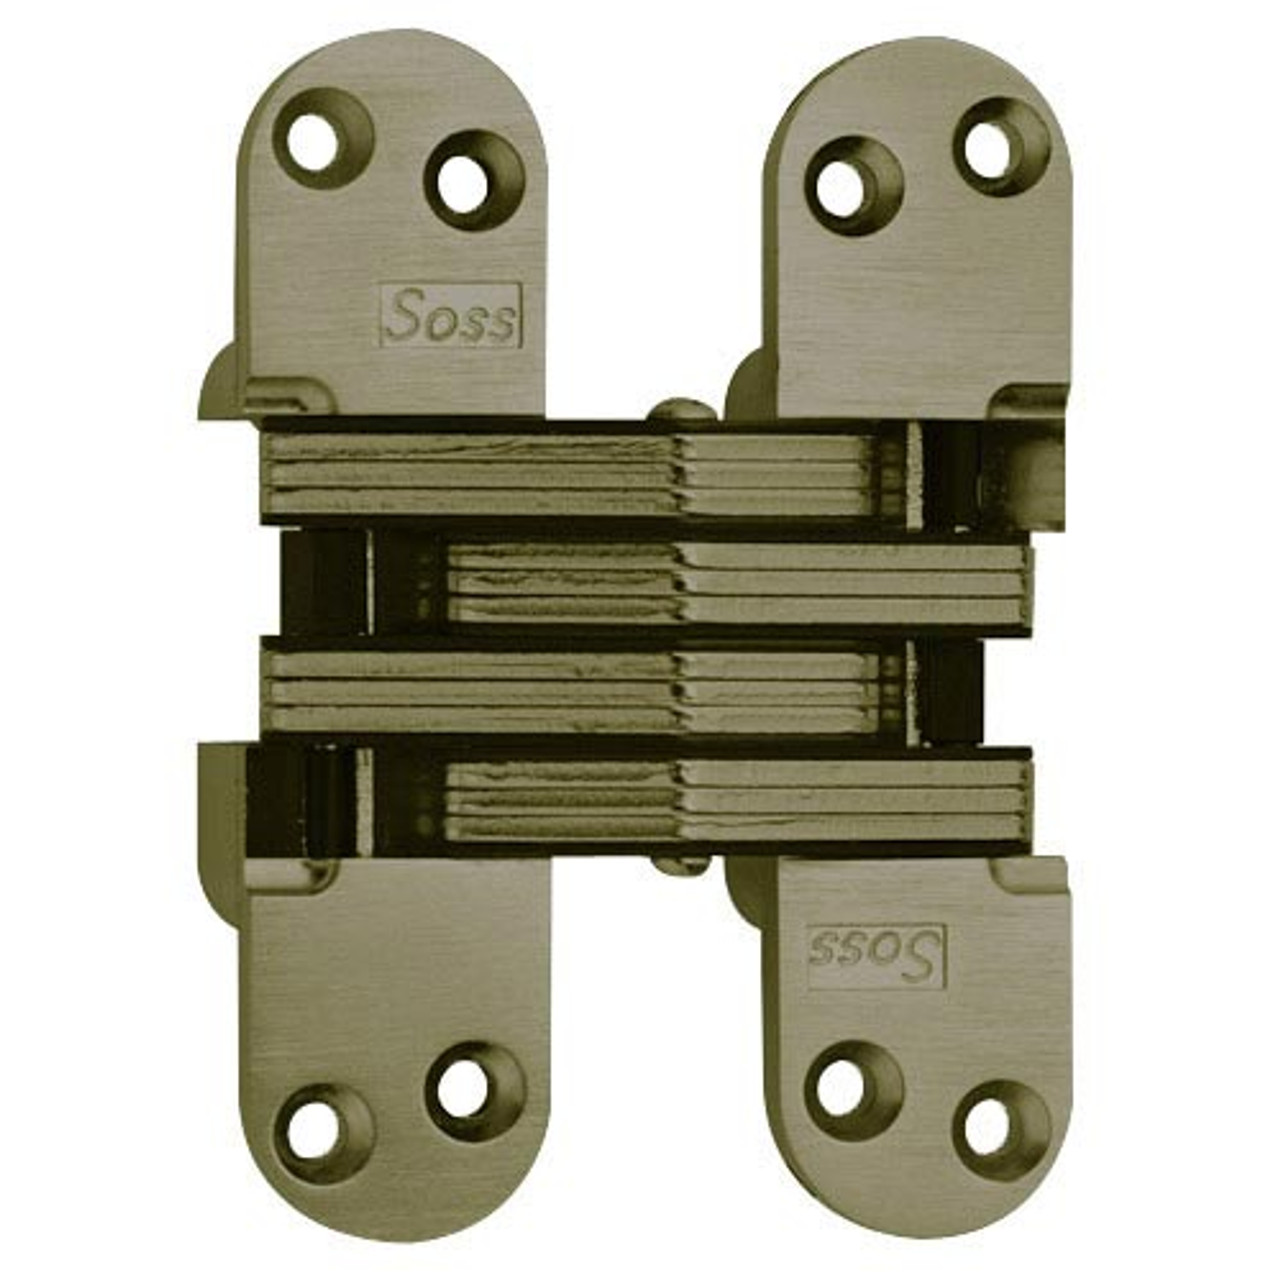 220-US14 Soss Invisible Hinge in Bright Nickel Finish